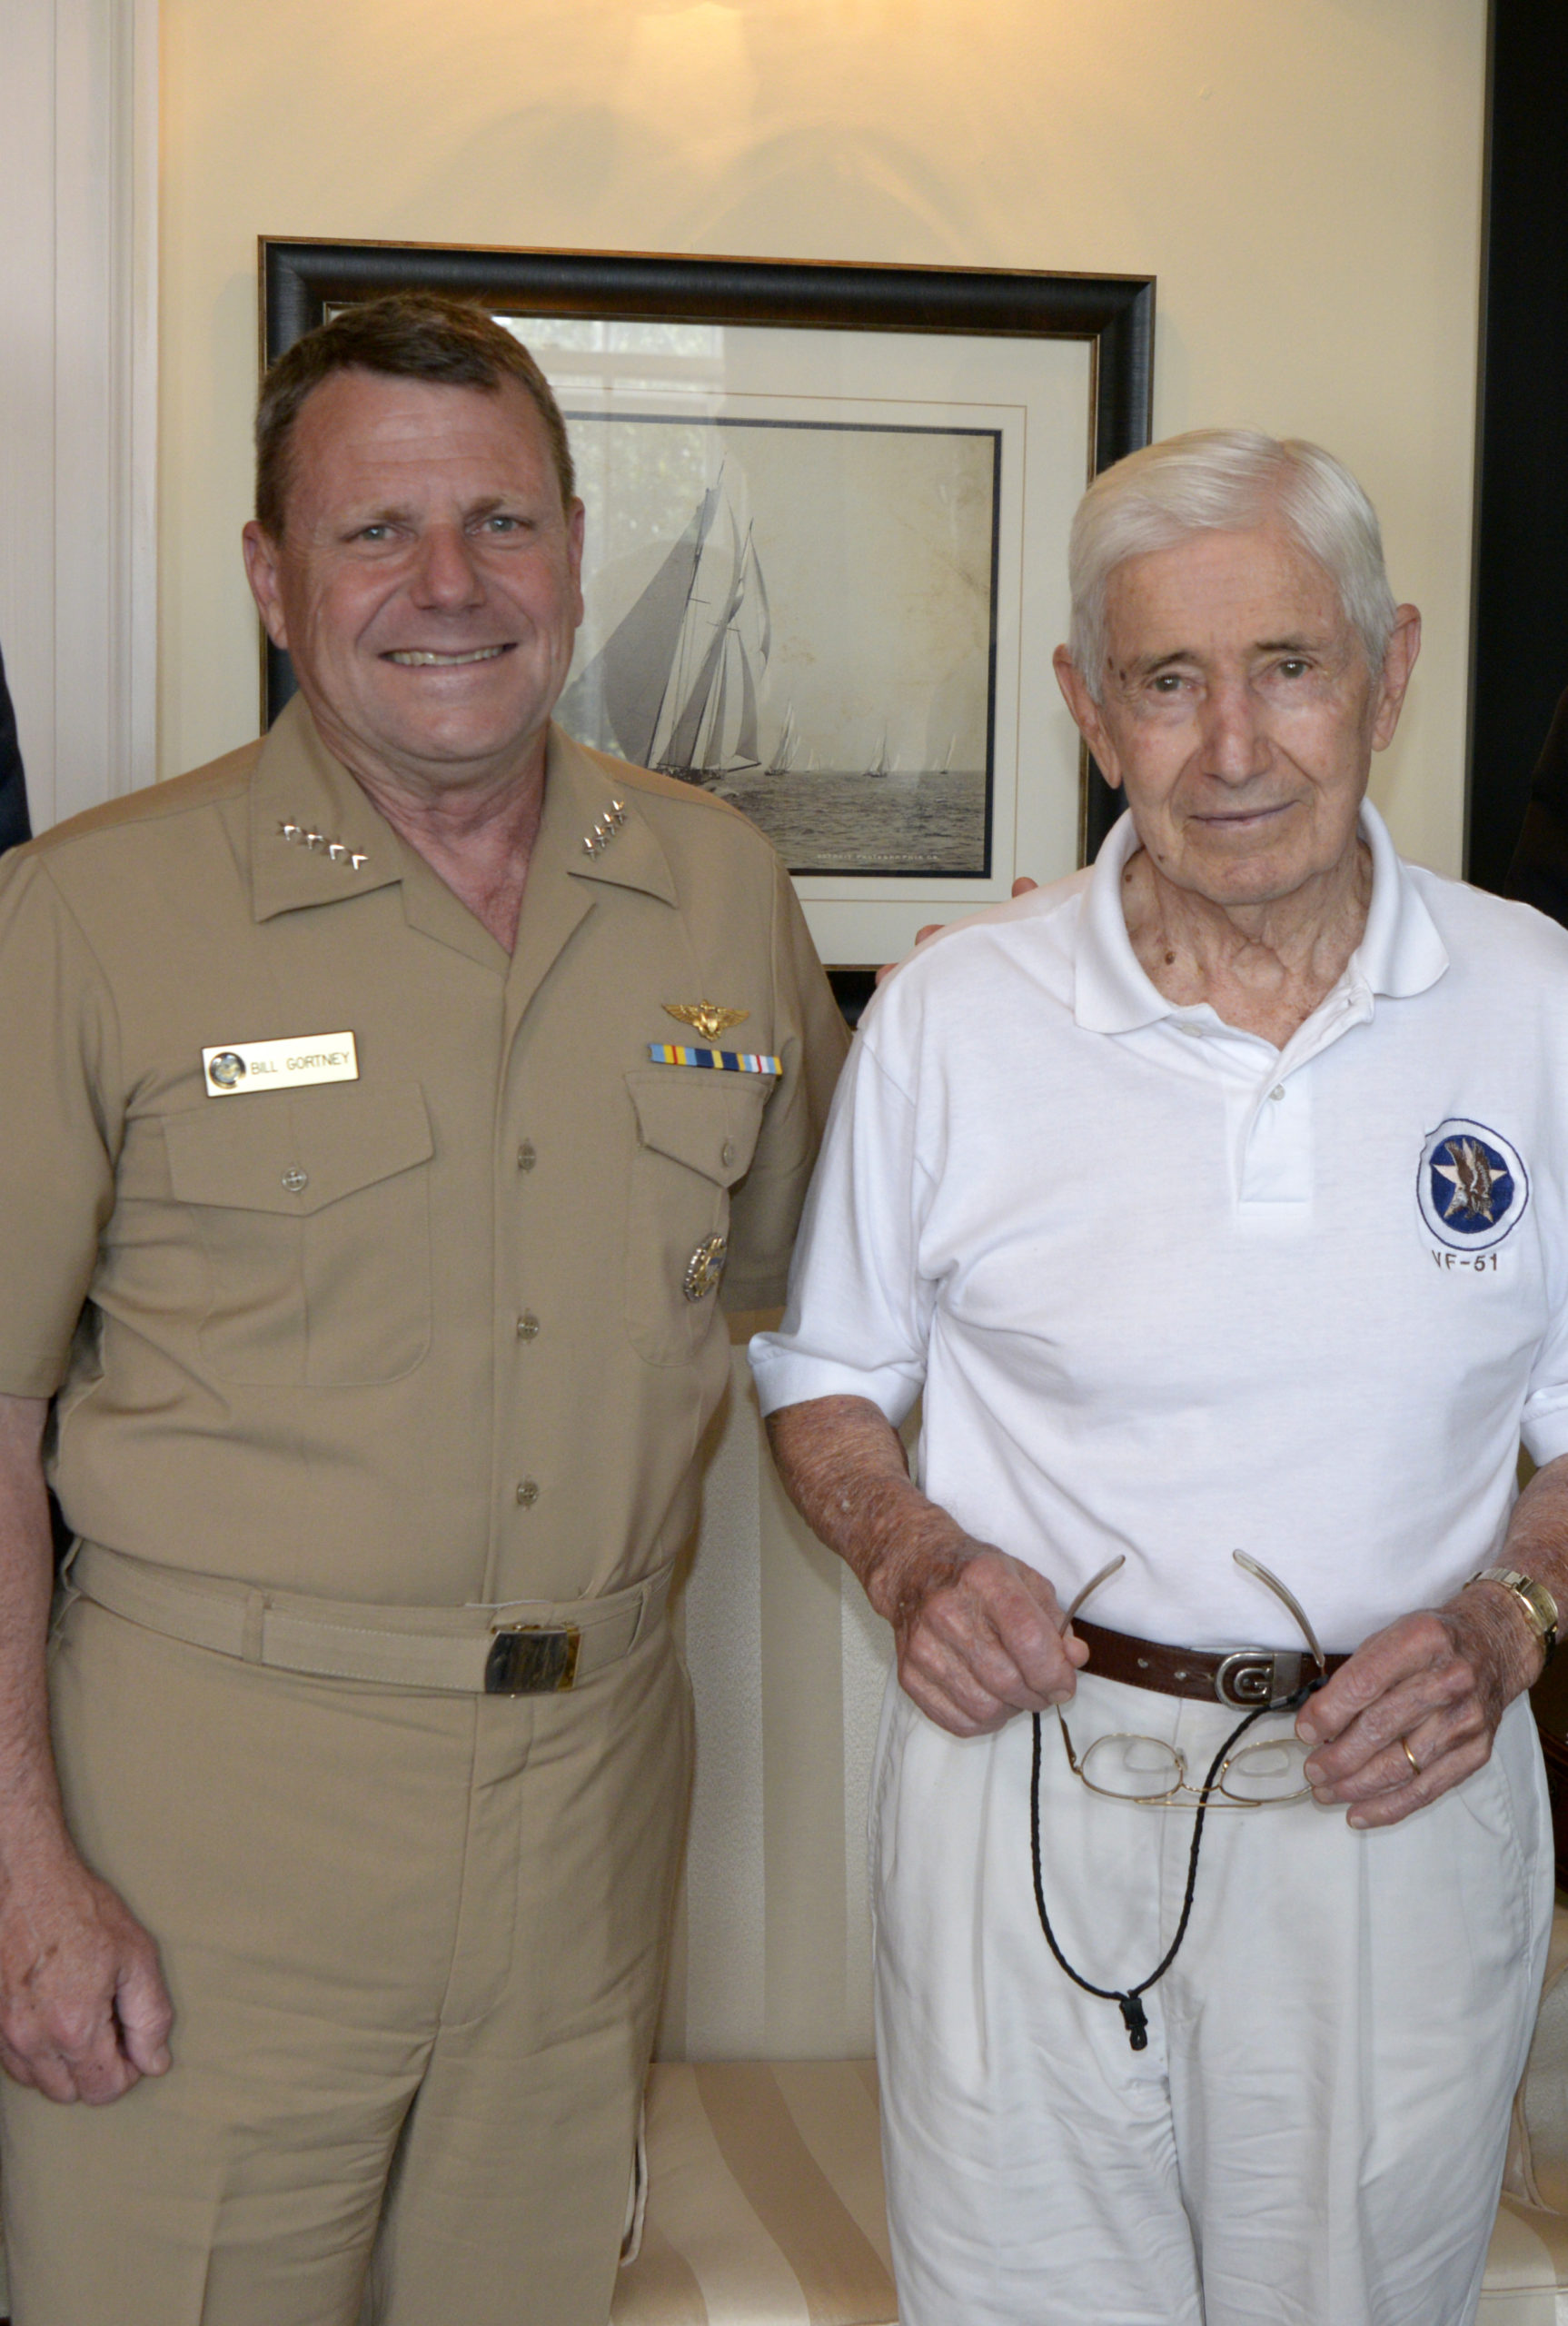 Admiral William Gorntey and Captain William Gortney, Provided by Captain Jane Campbell, US Navy Fleet Forces, Norfolk VA on June 23, 2014